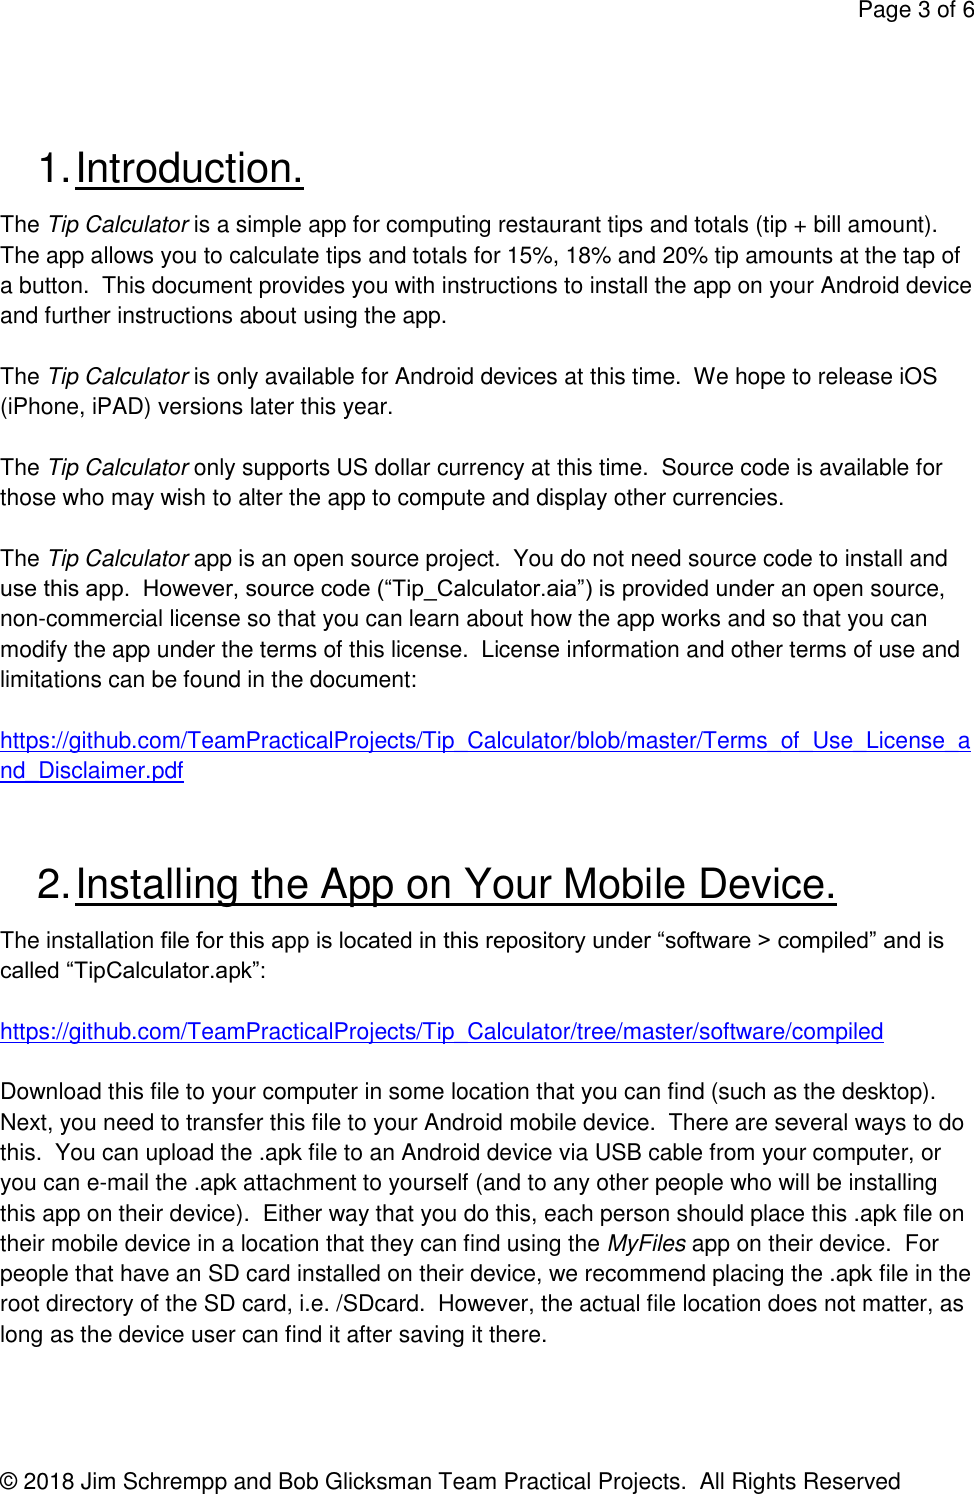 Page 3 of 6 - Tip Calculator Installation And User Manual